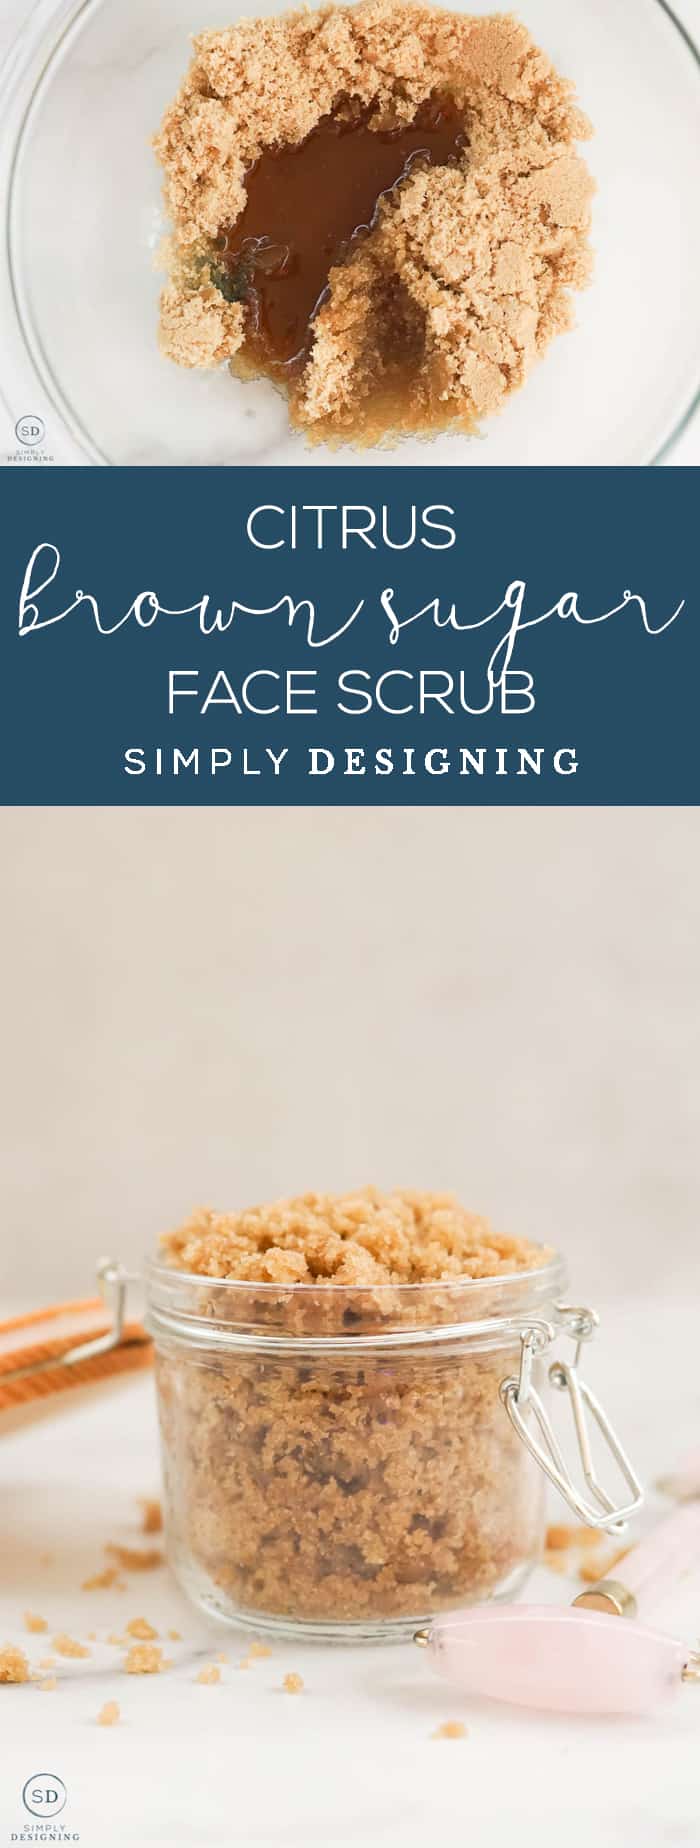 This citrus brown sugar face scrub is an all-natural way to exfoliate your face